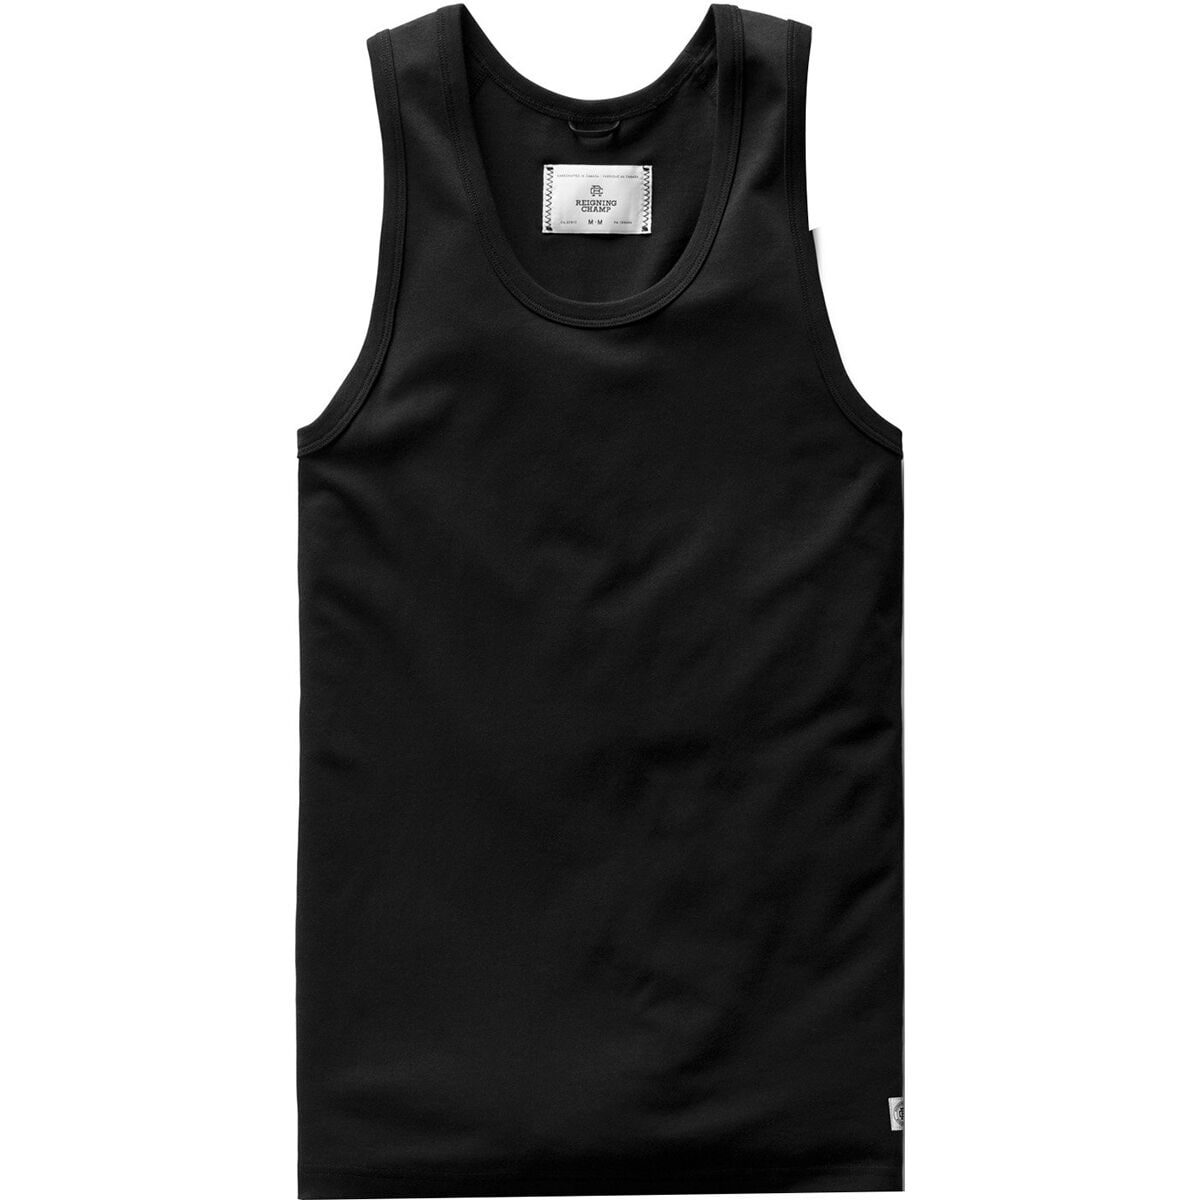 Reigning Champ Copper Jersey Tank Top - Men's - Clothing